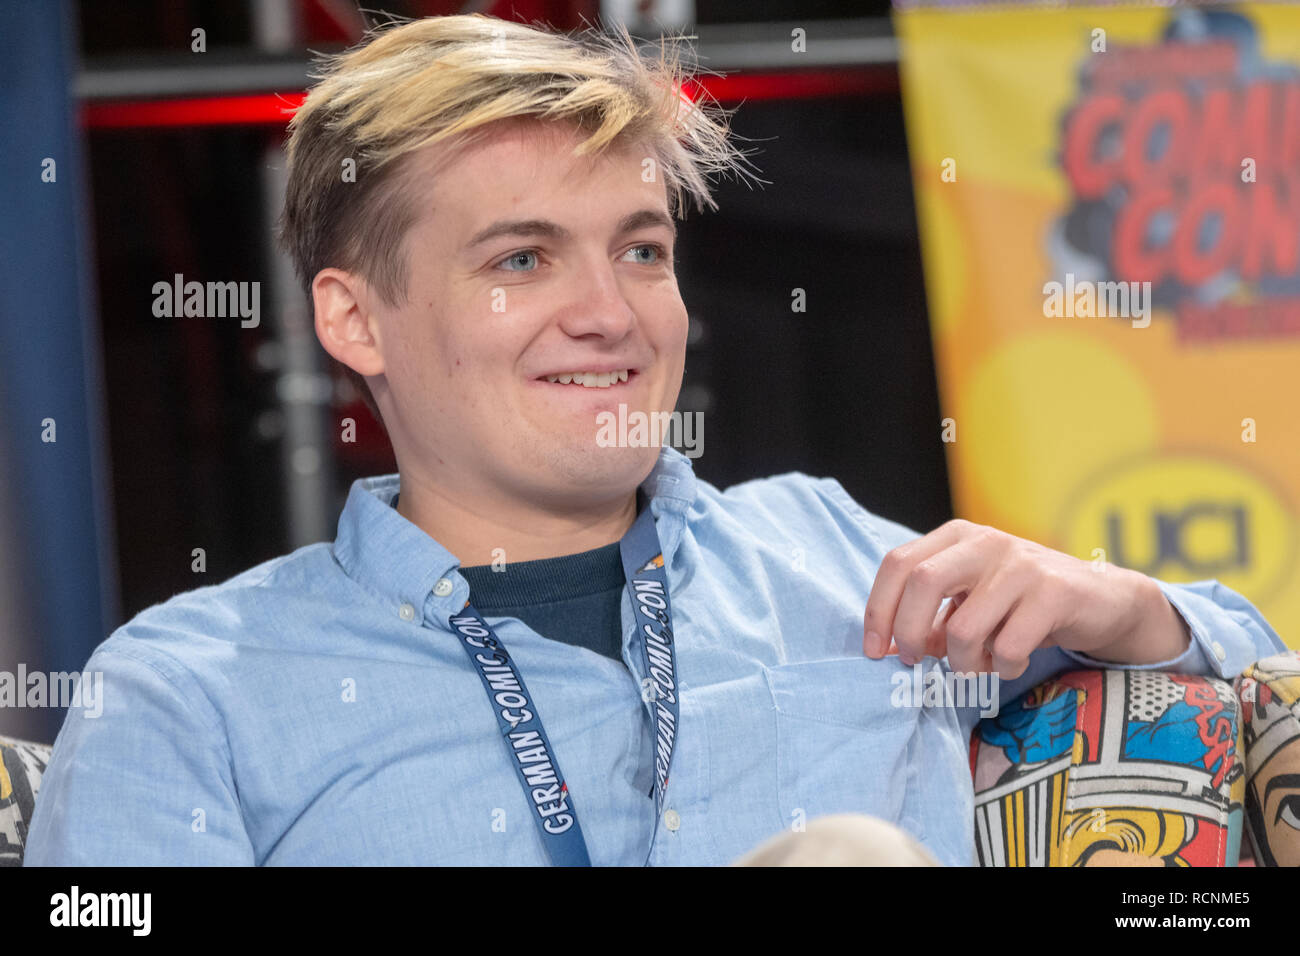 DORTMUND, GERMANY - December 1st 2018: Jack Gleeson (*1992, Irish actor) at German Comic Con Dortmund, a two day fan convention Stock Photo